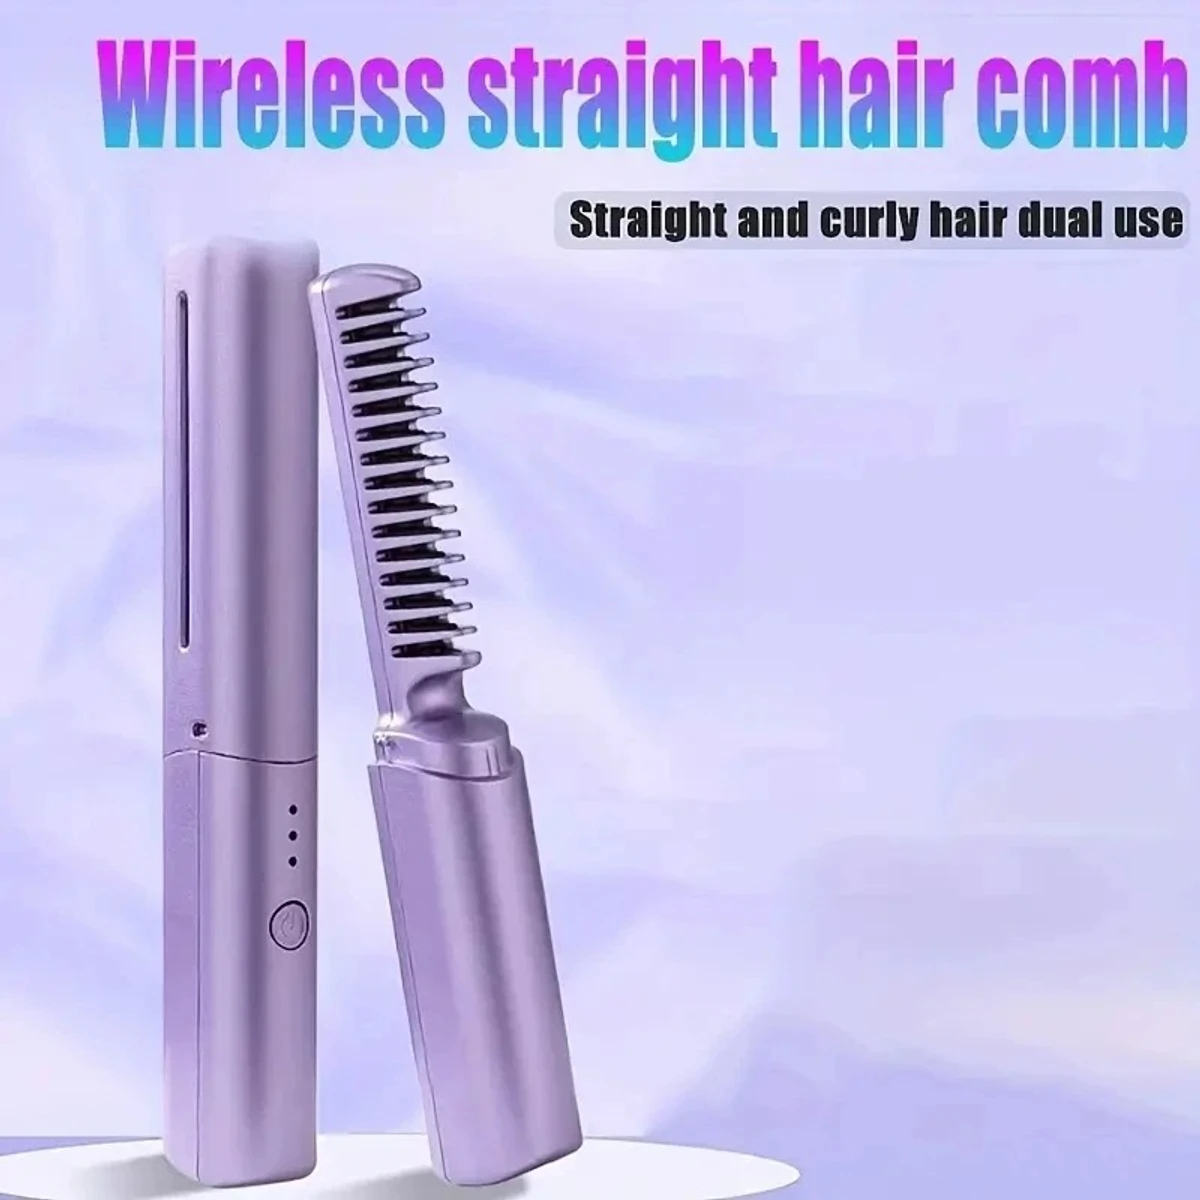 Rechargeable Mini Hair Straightener, Portable Travel Negative Ion Hair  Straightener Styling Comb, 2 in 1 Professional Lazy Portable USB Wireless Hair Straightener Comb for Travel and Home Use .